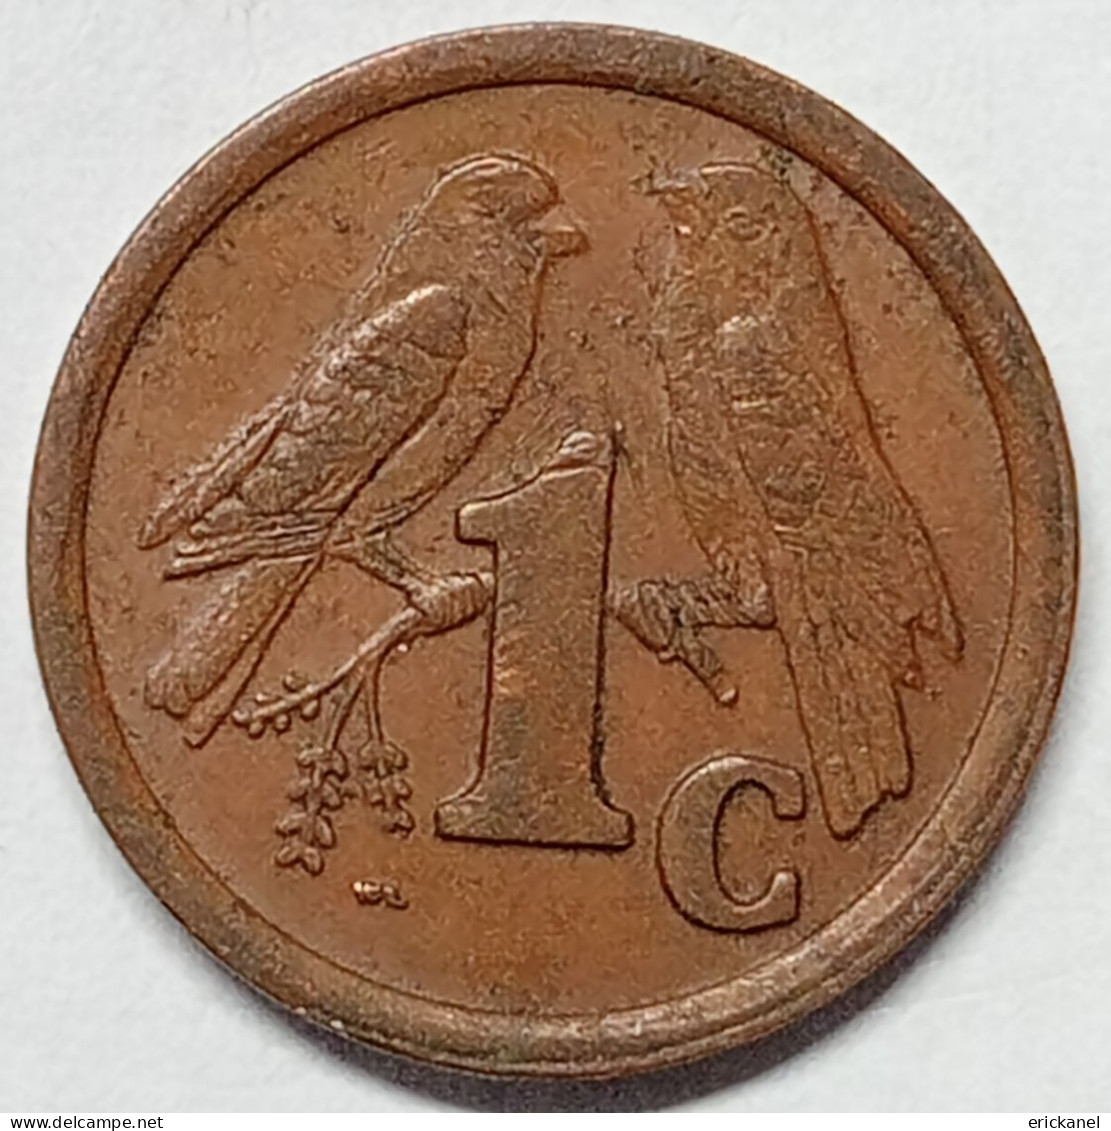 SOUTH AFRICA 1991 1 CENT - South Africa